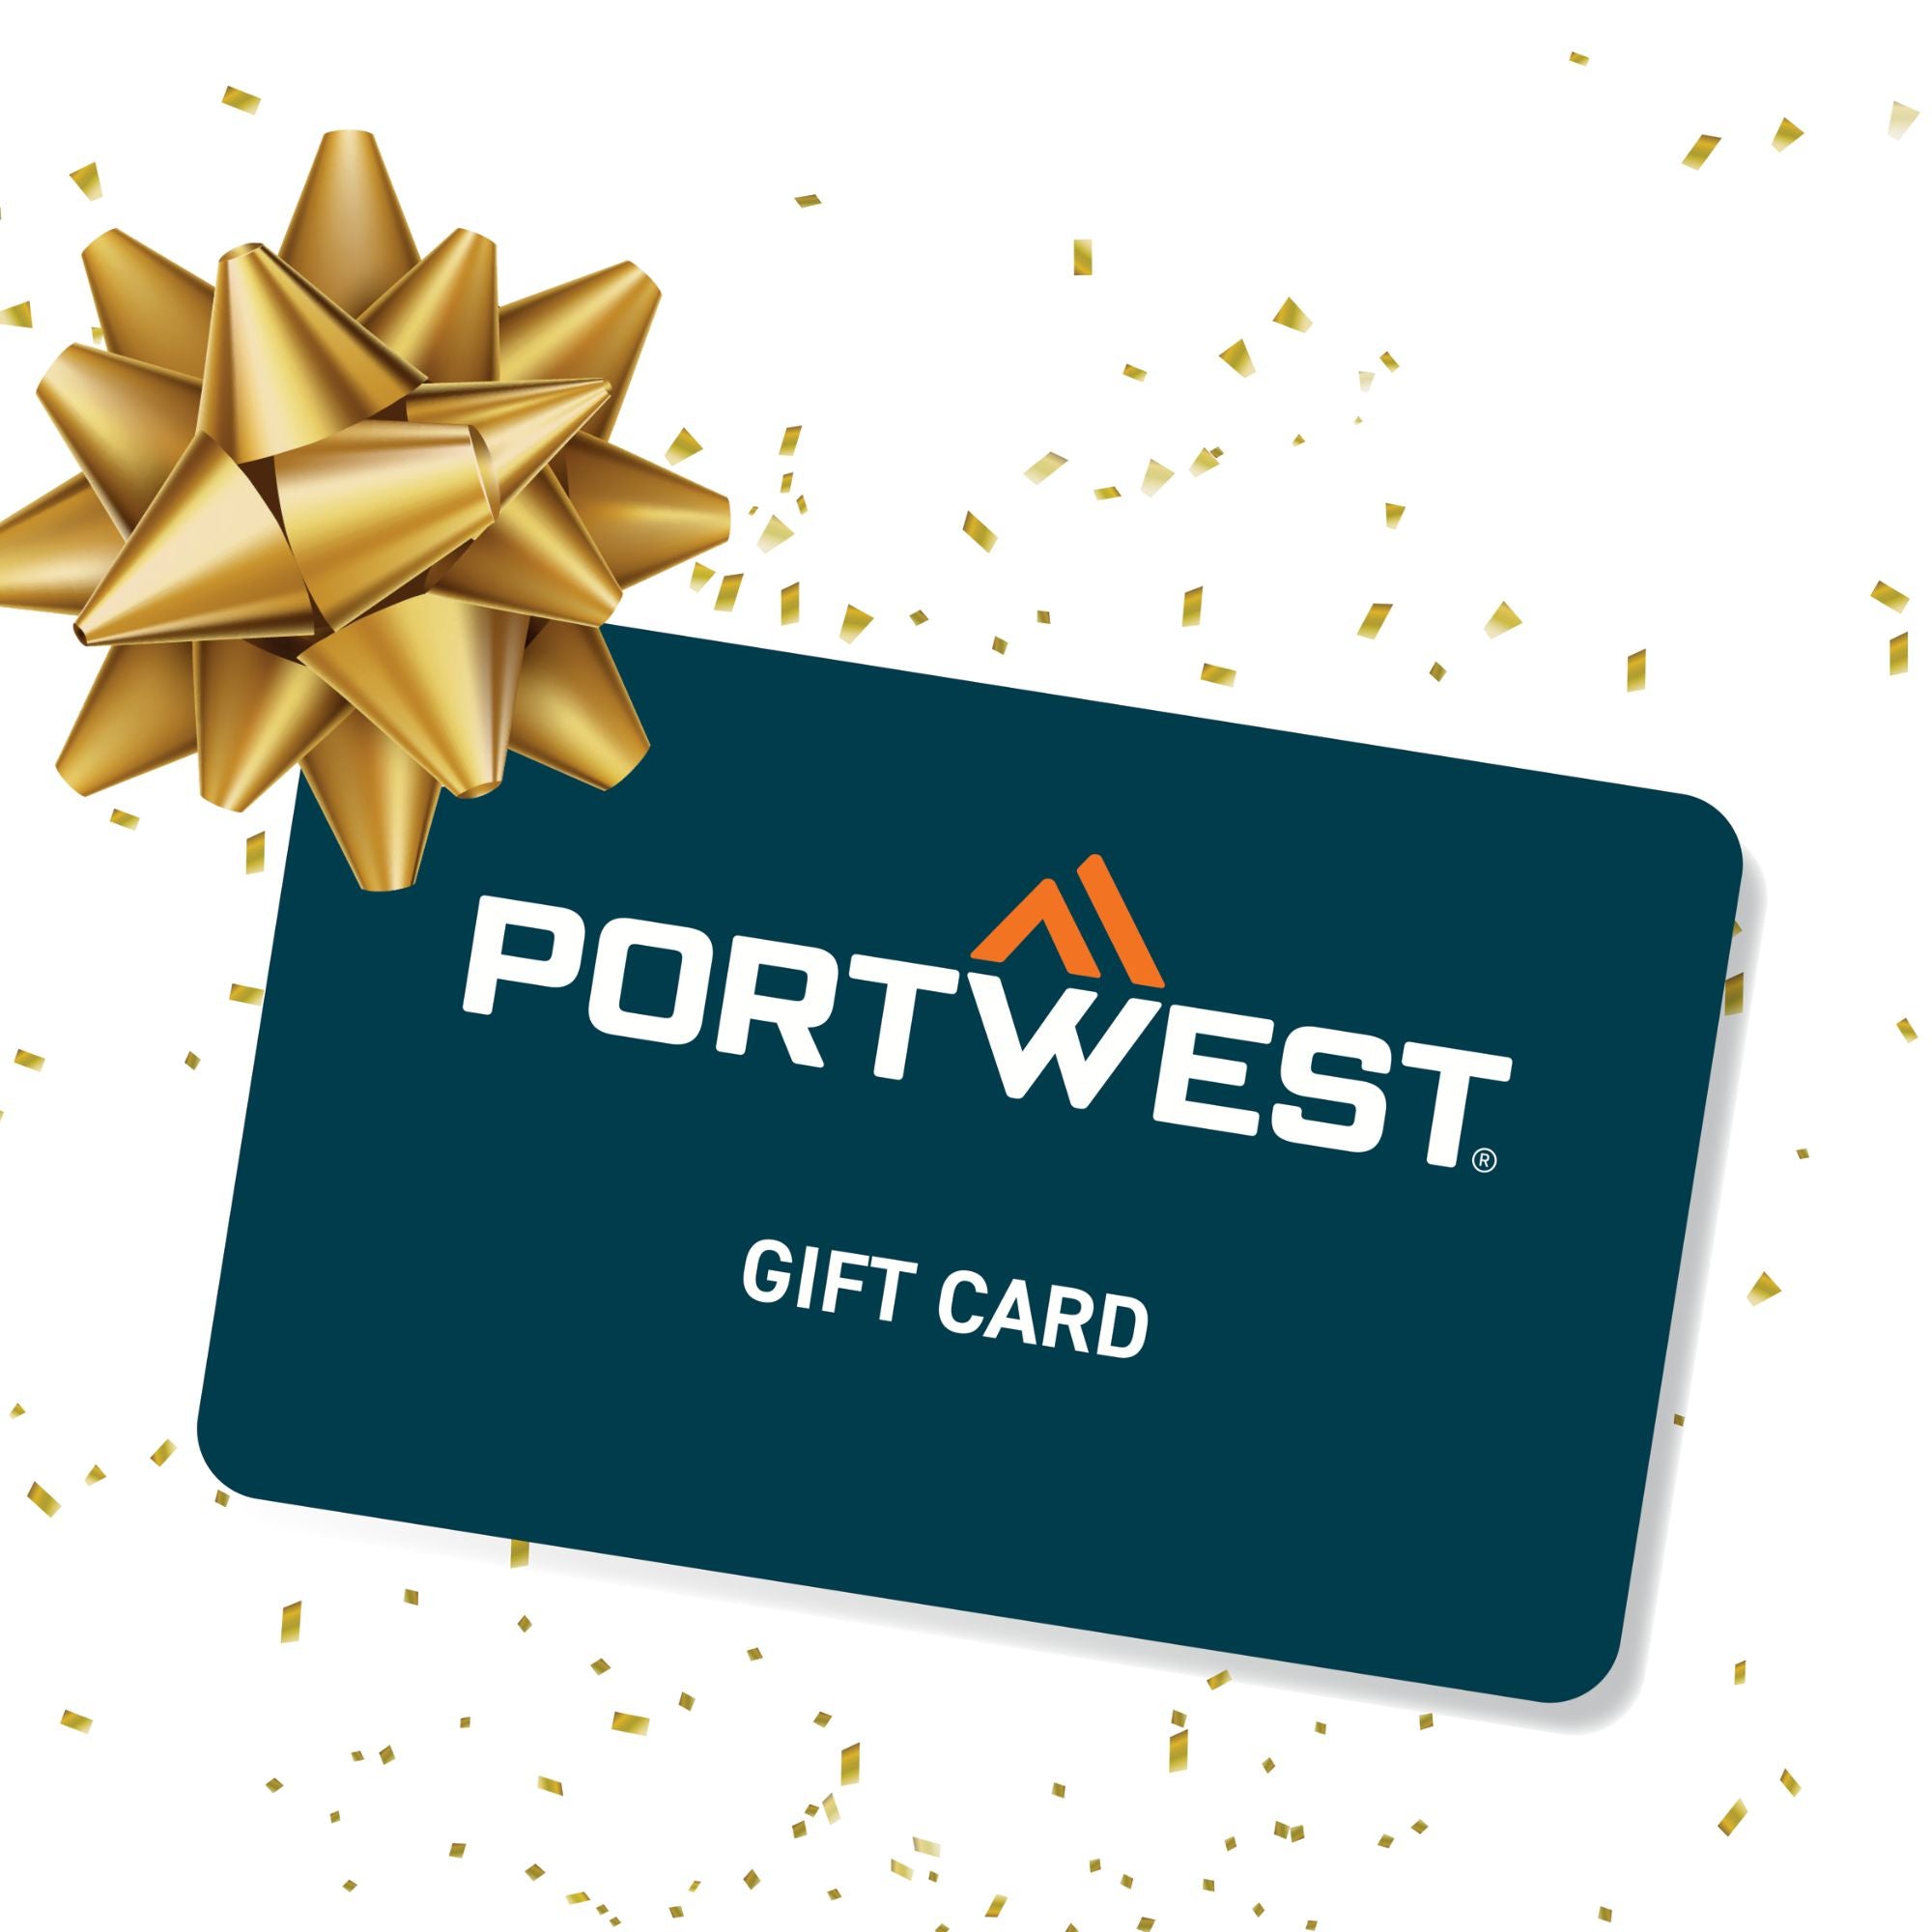 Portwest Ireland Gift Card - For Instore Use